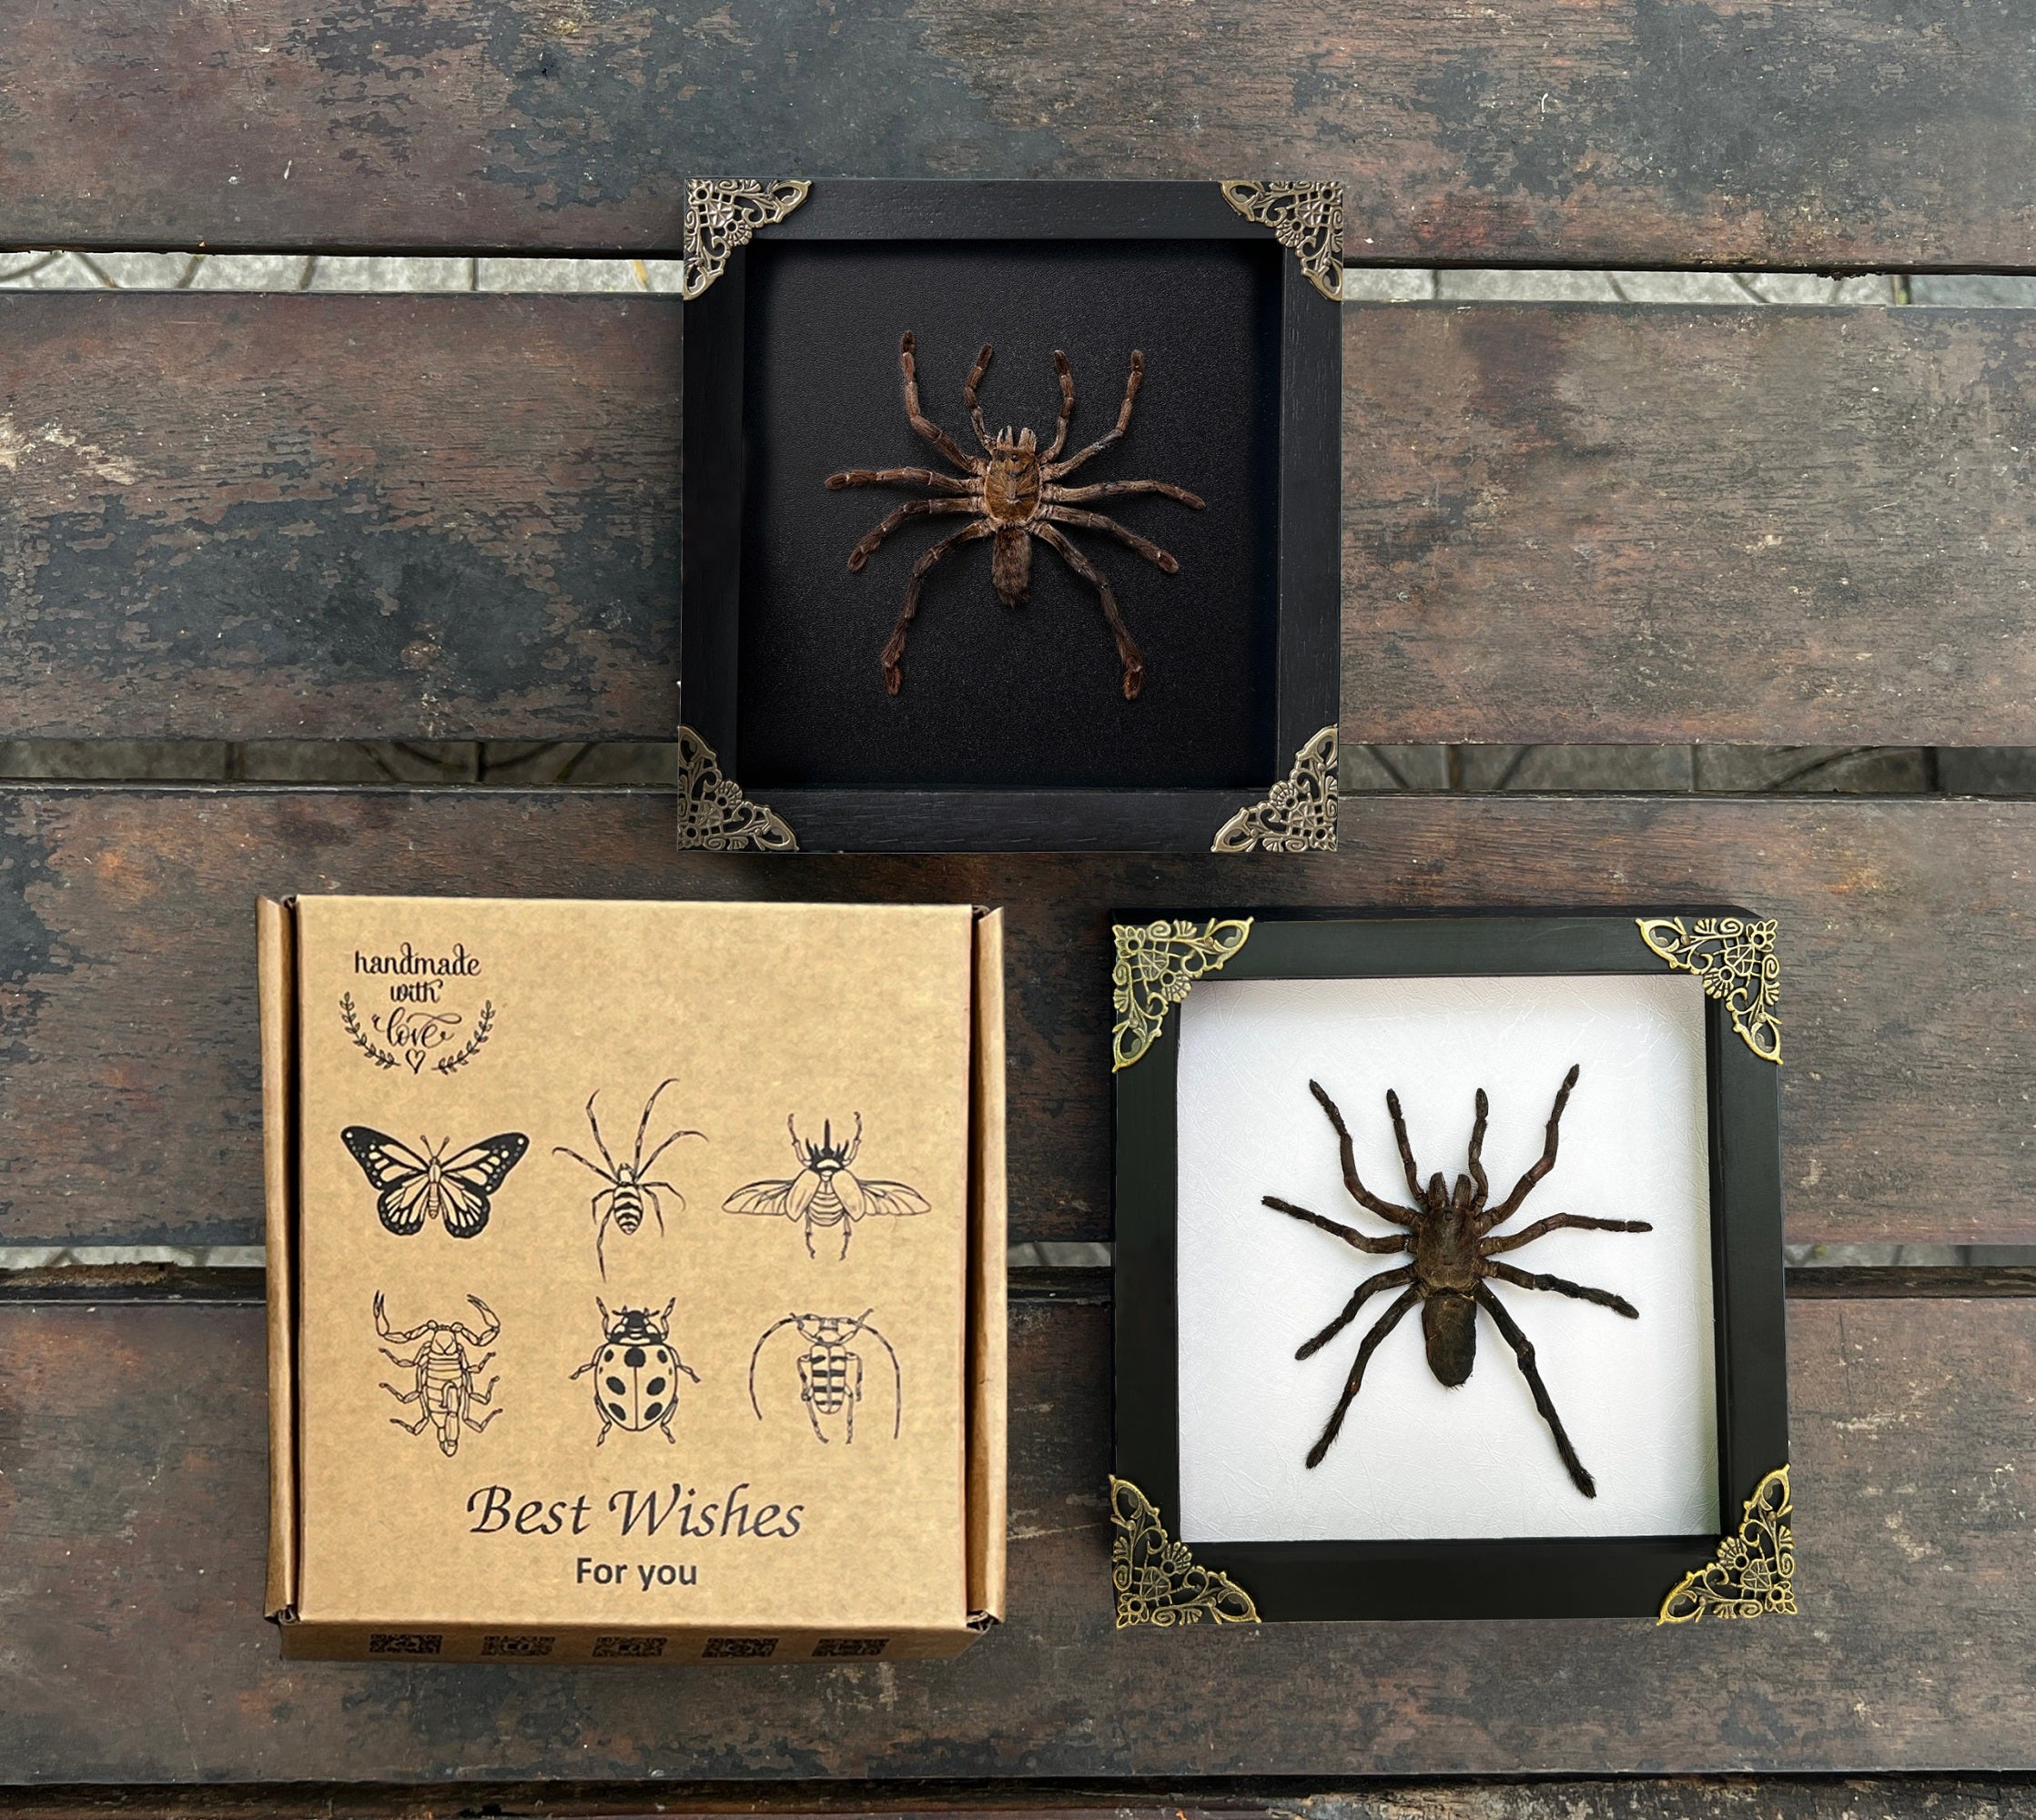 Real Giant Spider White Frame Beetle Insect Gothic Decoration Artwork Home Decor K18-56-TR